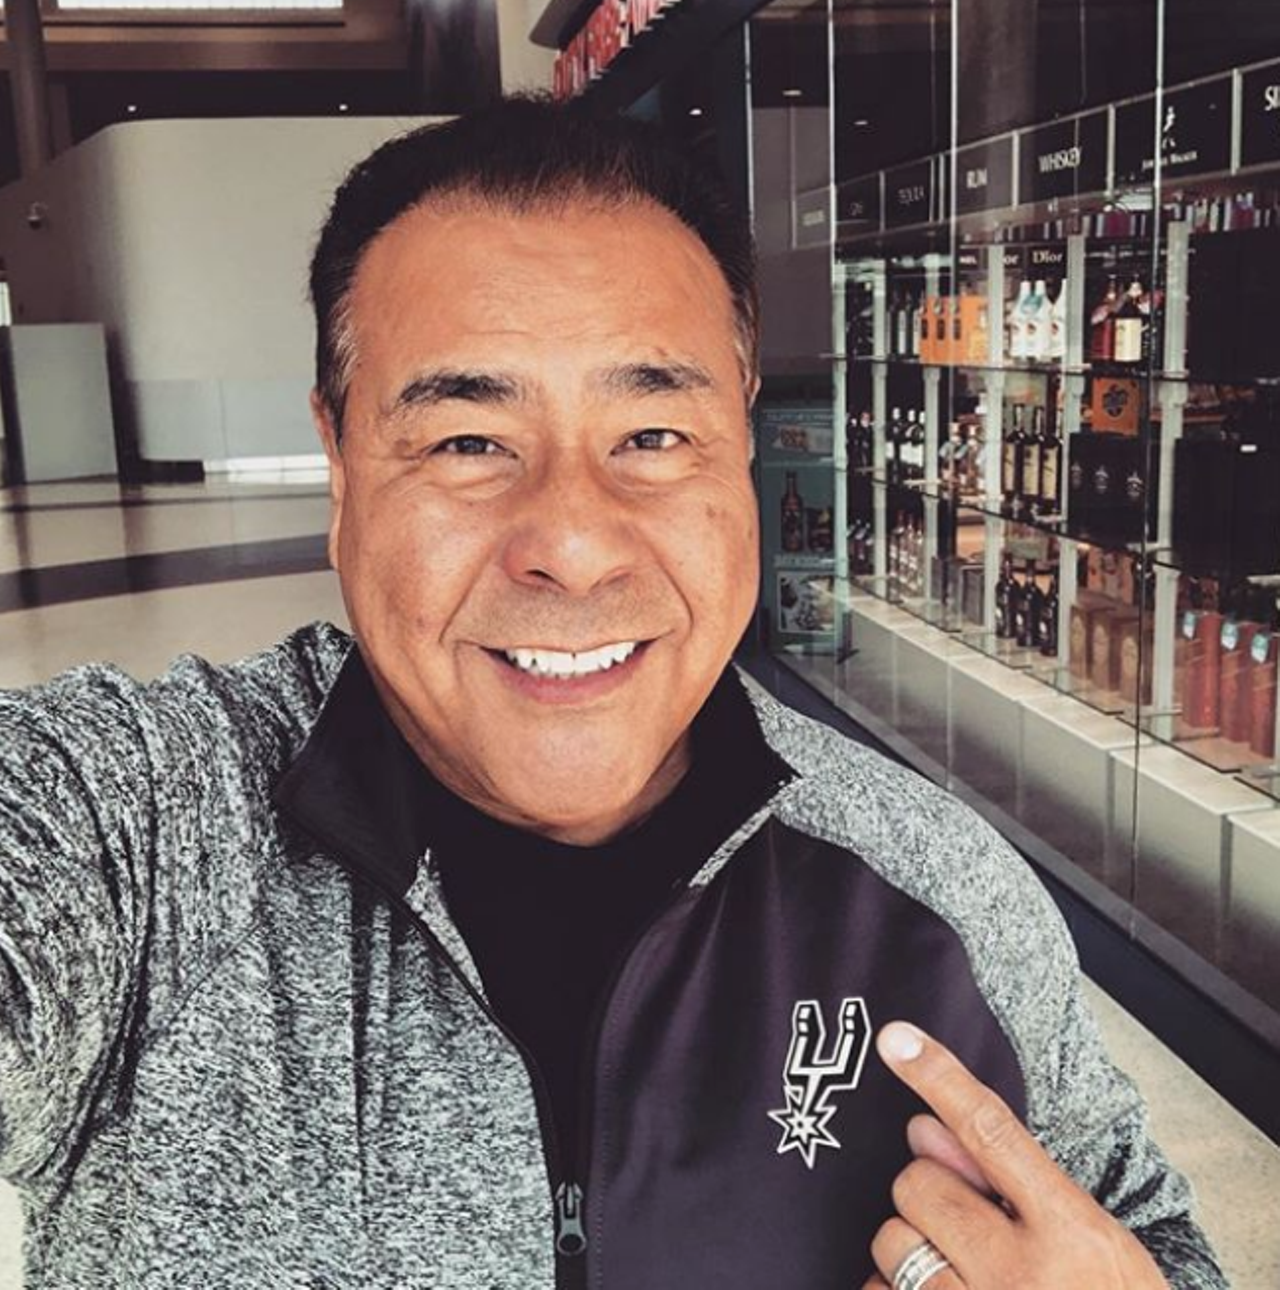 John Quiñones
Juan Manuel “John” Quiñones was born in the 2-1-0 in 1952 and graduated from Brackenridge HS. With the help of Upward Bound, he attended St. Mary’s University and is now the longtime host of What Would You Do?
Photo via Instagram / johnquinones